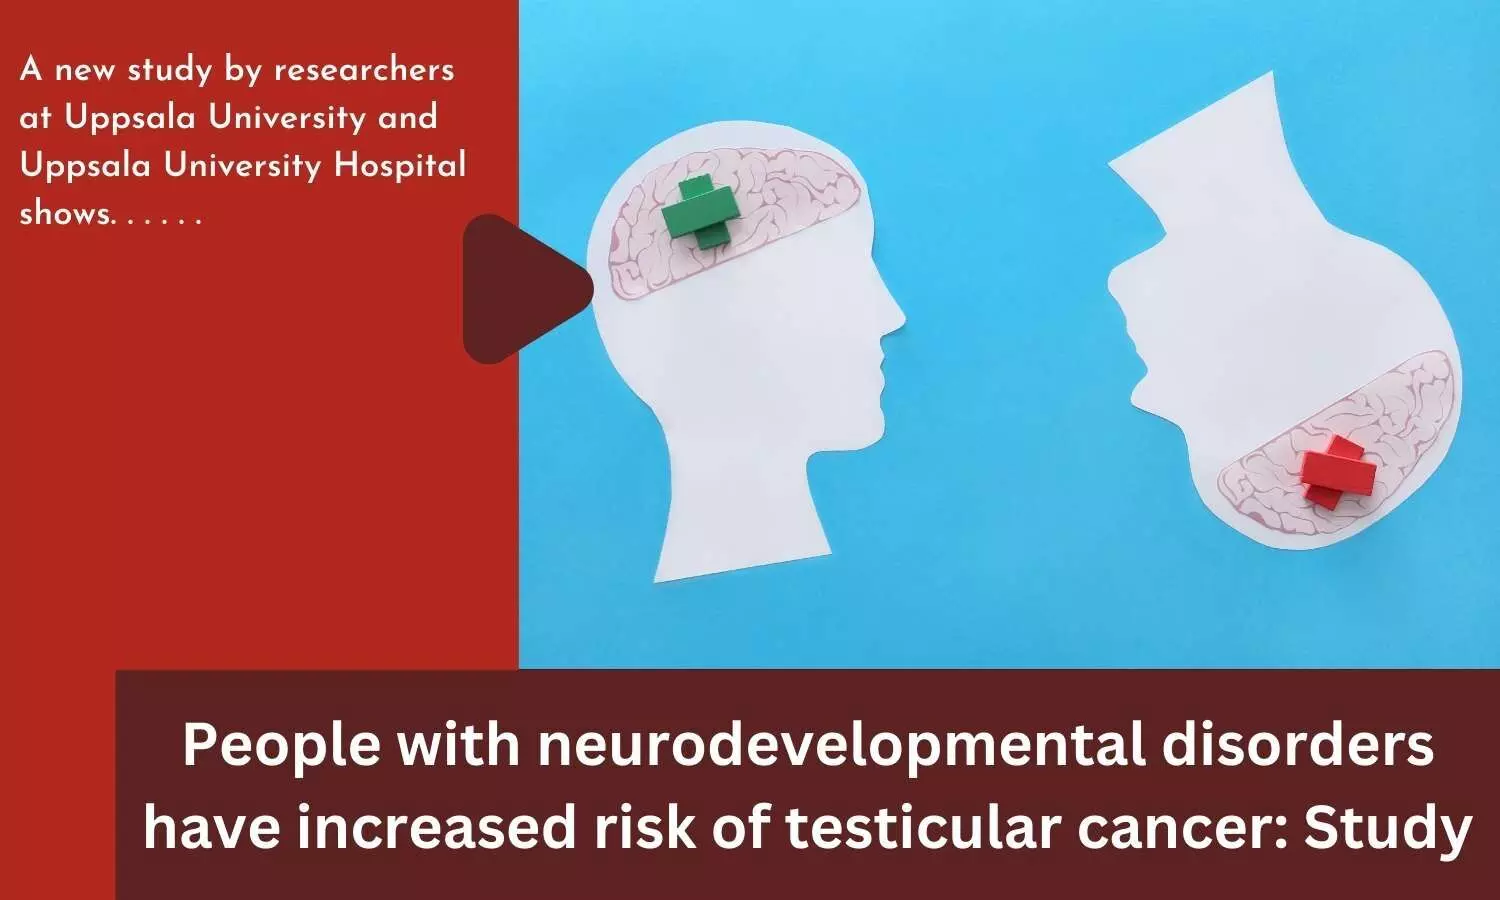 People with neurodevelopmental disorders have increased risk of testicular cancer: Study